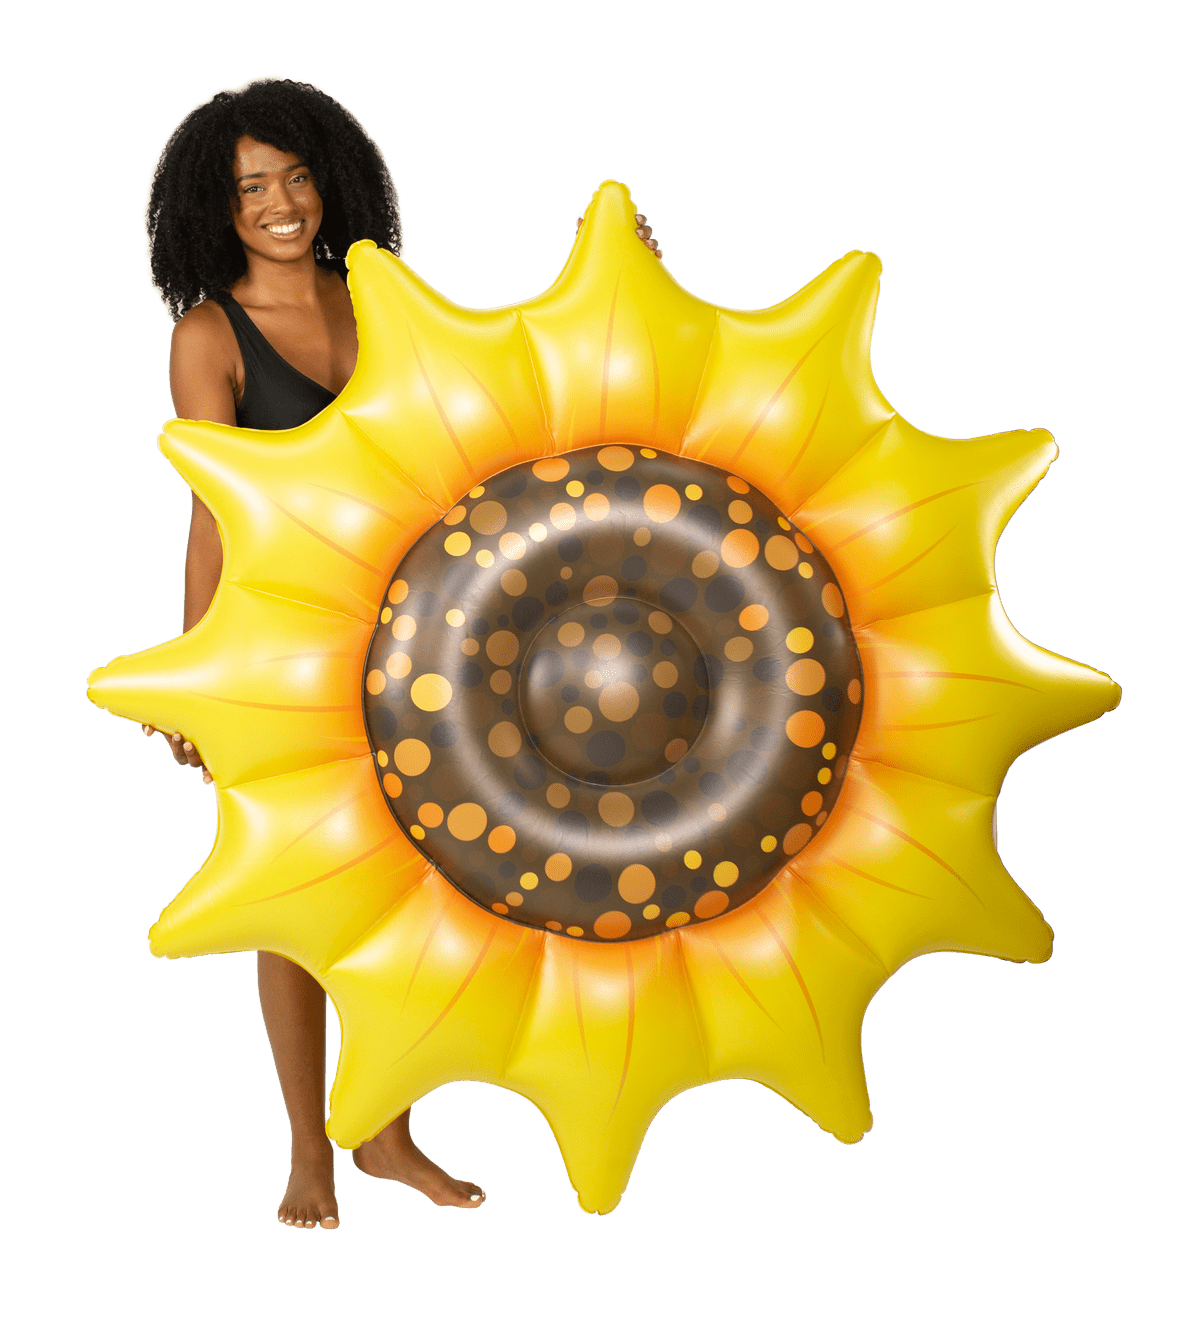 Inflatable Sunflower Island Pool Float Giant 